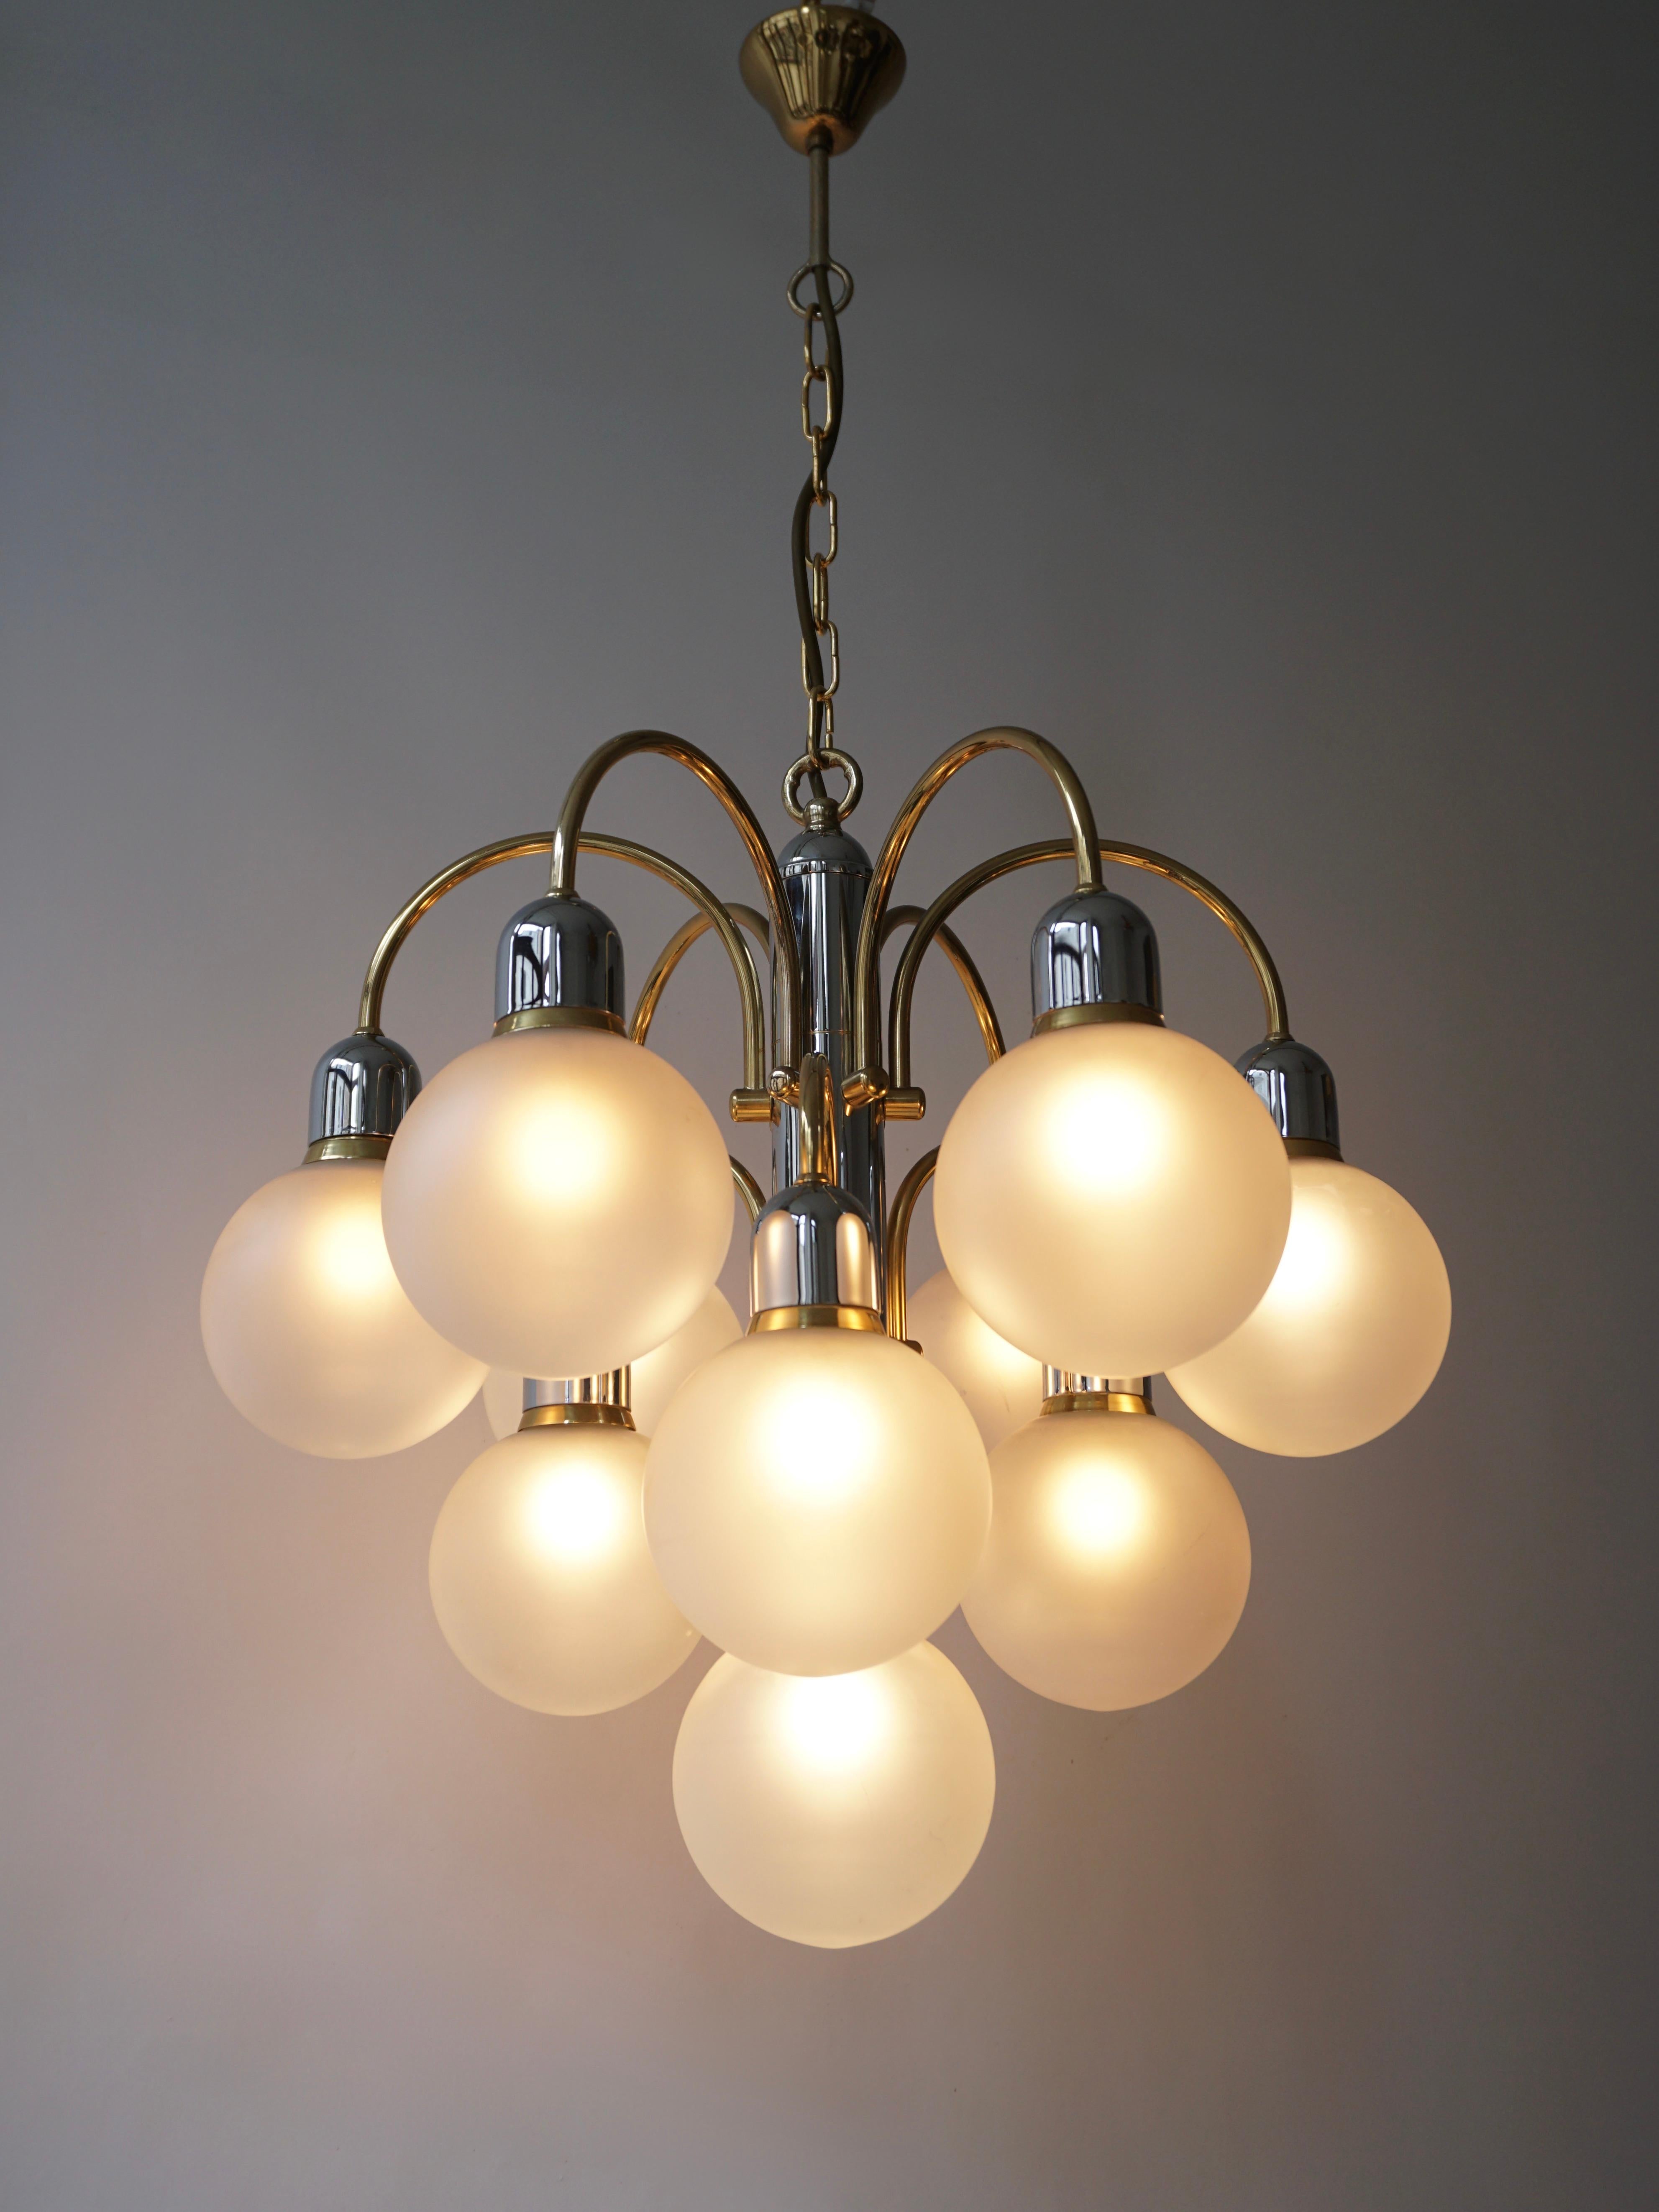 A Italian chandelier in brass with ten arms of which each hold a Murano glass sphere. The bulbs are divided over three levels, creating an extravagant look. 
The light created by this chandelier is very pleasant and ambient.

Measures: Diameter